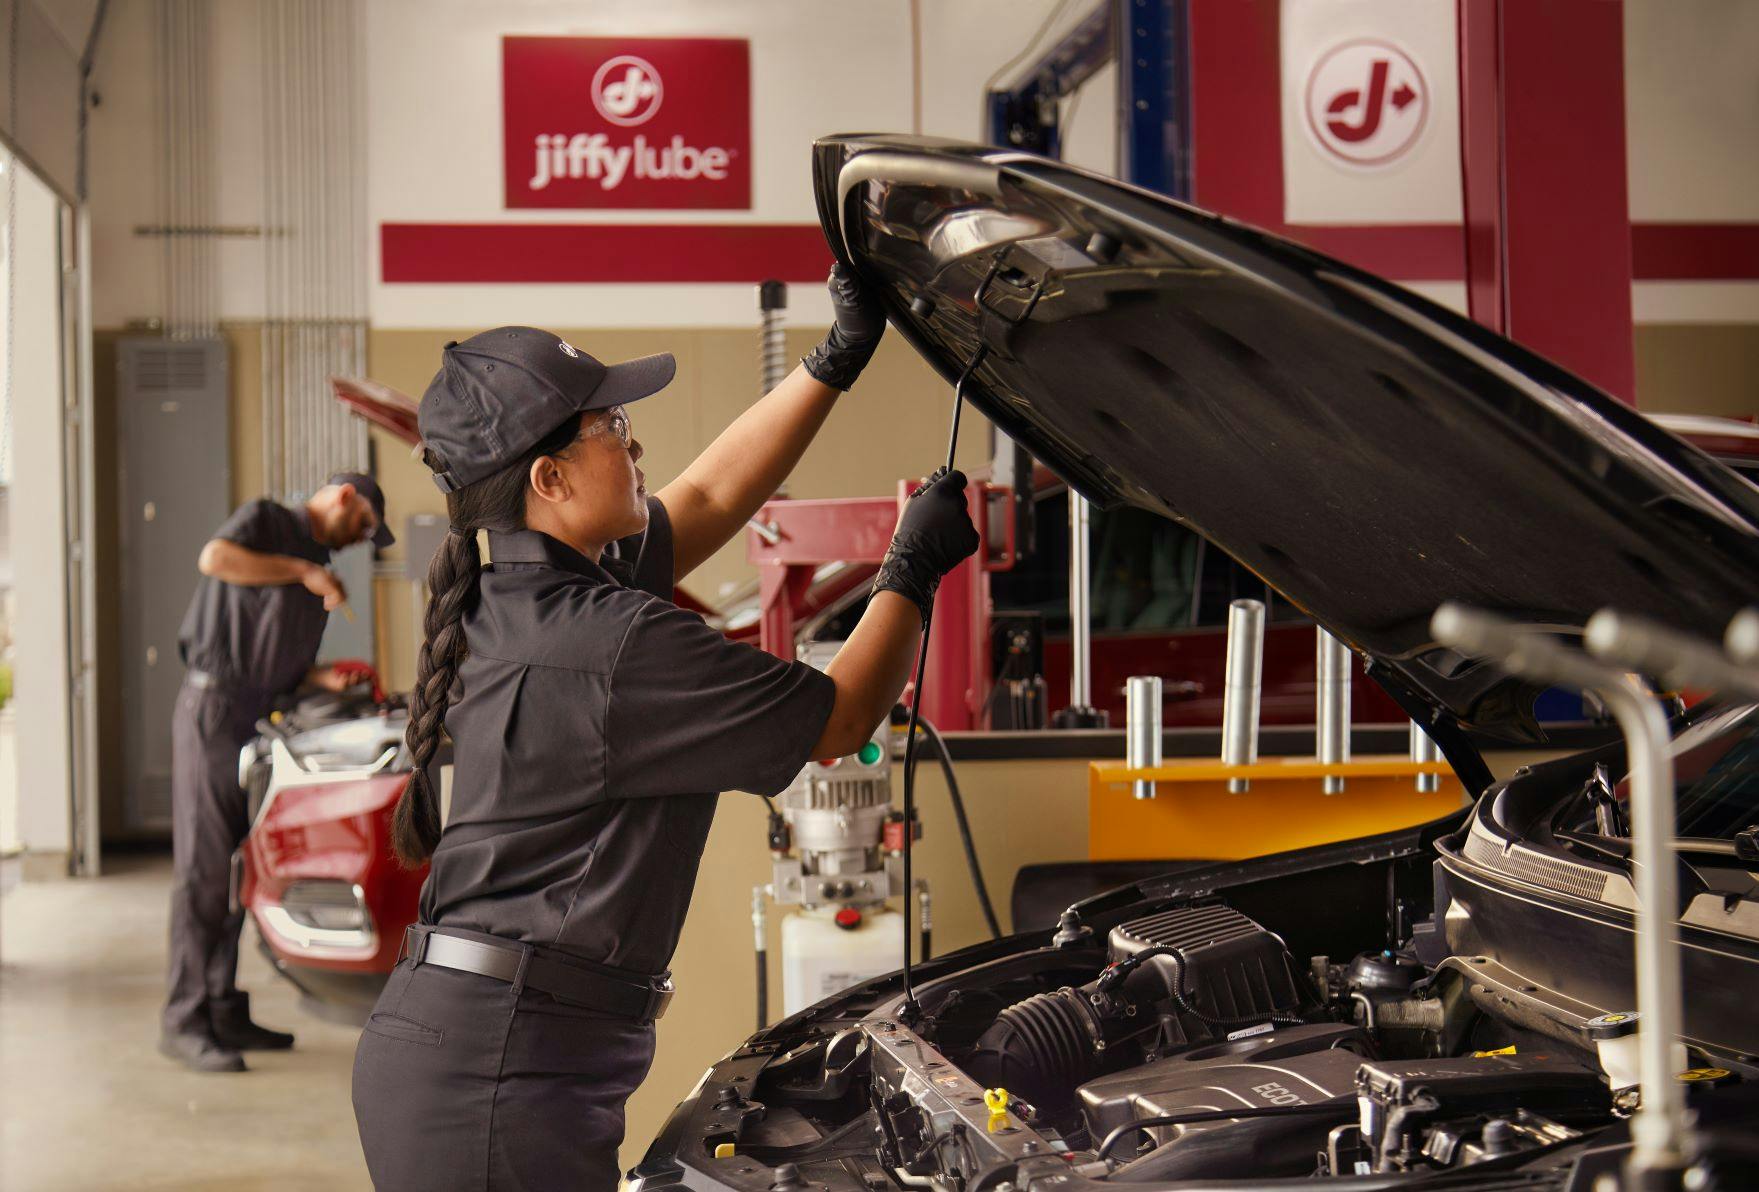 A Jiffy Lube technician preparing to inspect a vehicle's AC